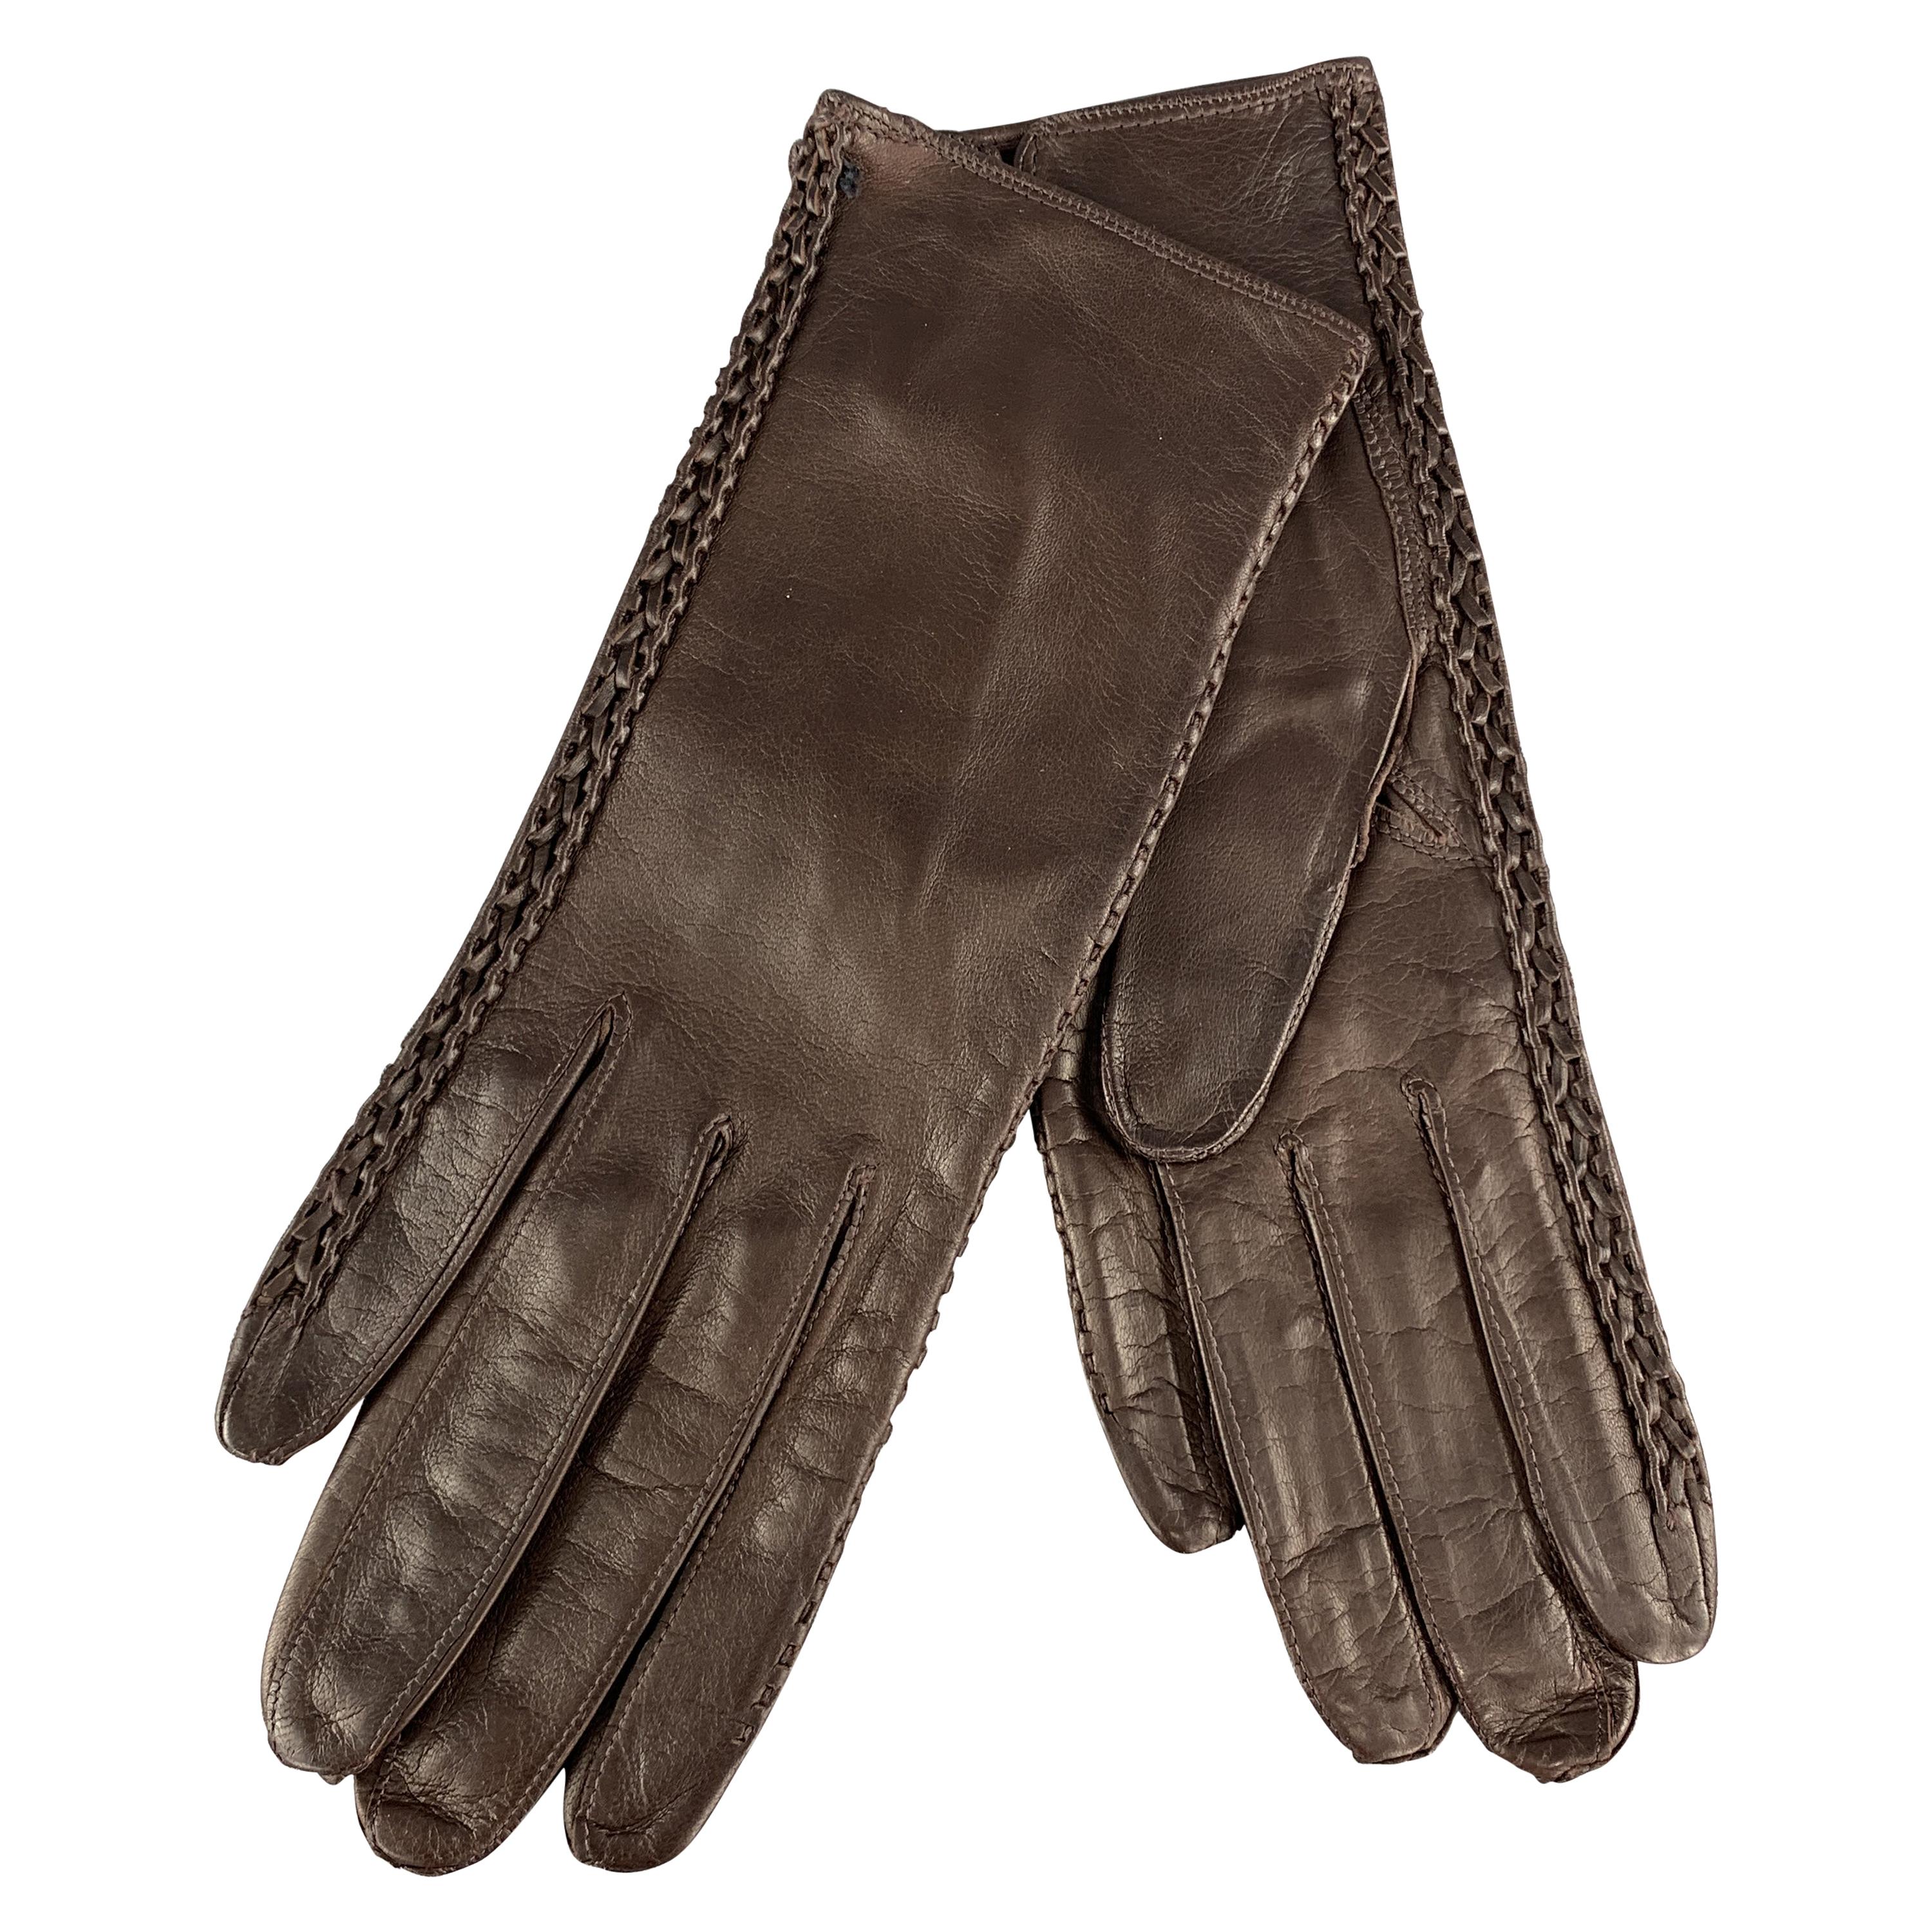 MADOVA Size S Brown Leather Whipstitch Trim Gloves